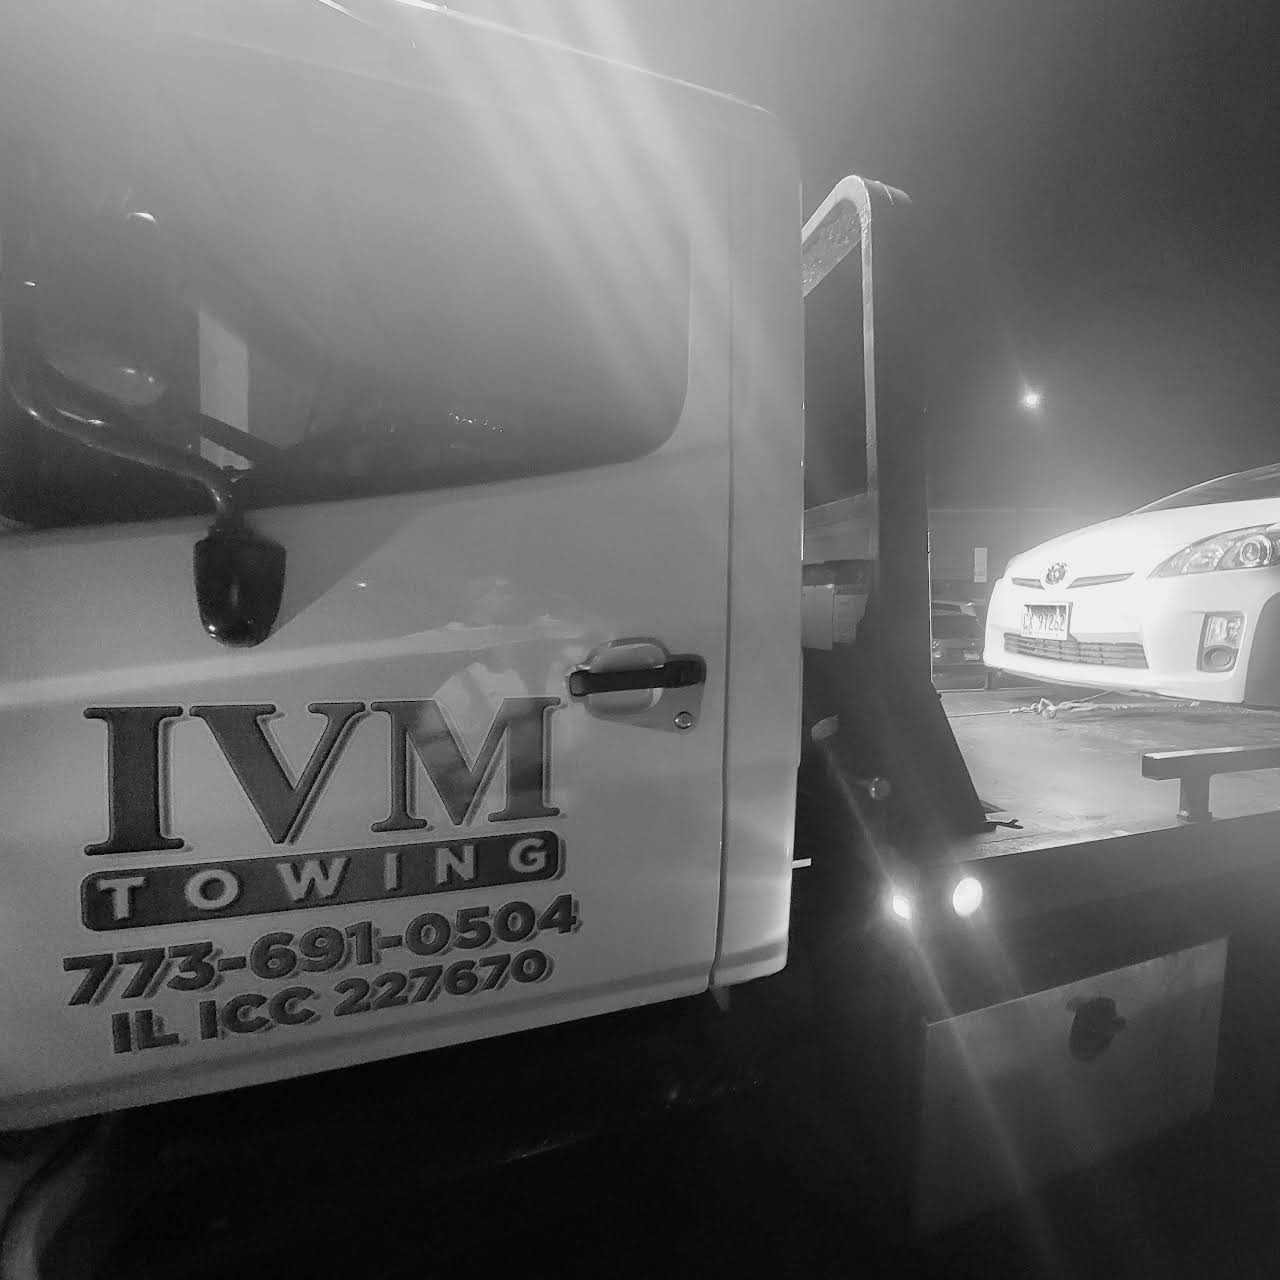 (c) Ivmtowing.com